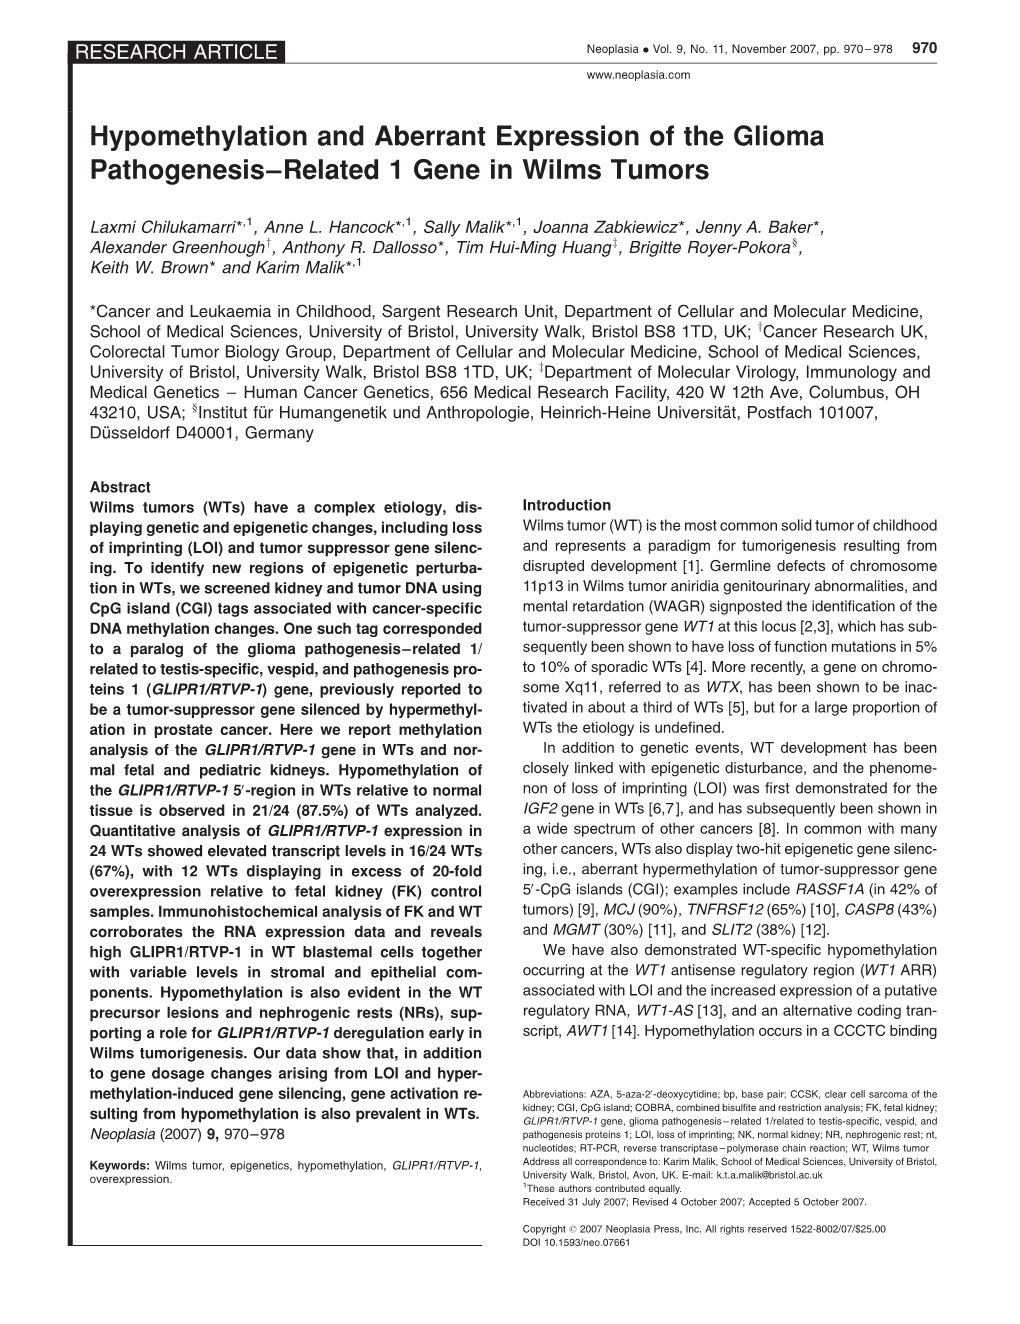 Hypomethylation and Aberrant Expression of the Glioma Pathogenesis–Related 1 Gene in Wilms Tumors